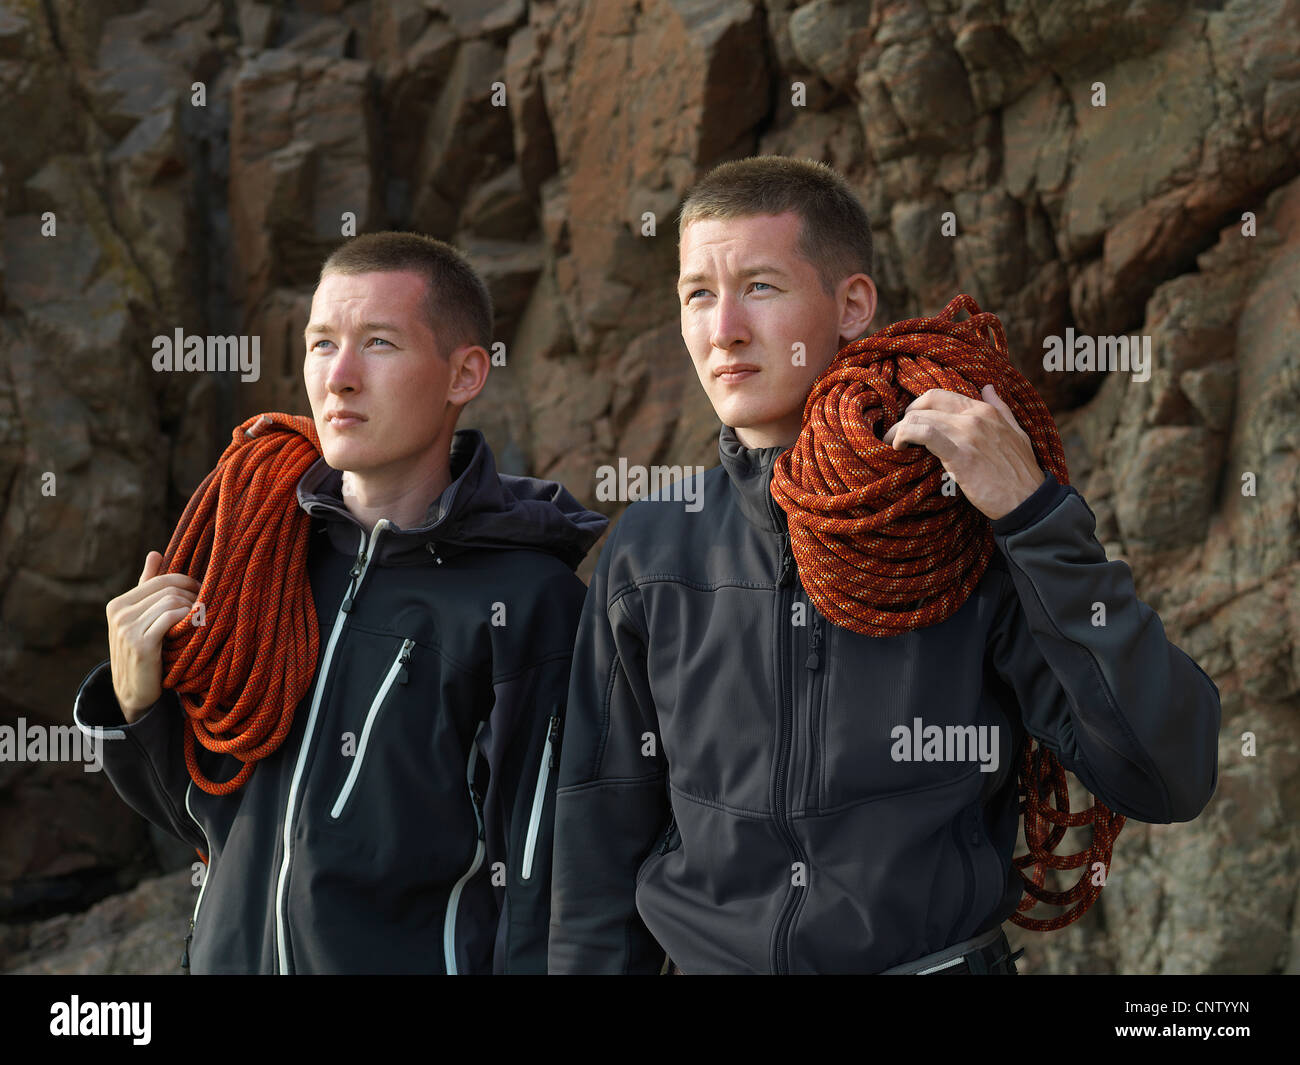 Men carrying loops of rope on beach Stock Photo